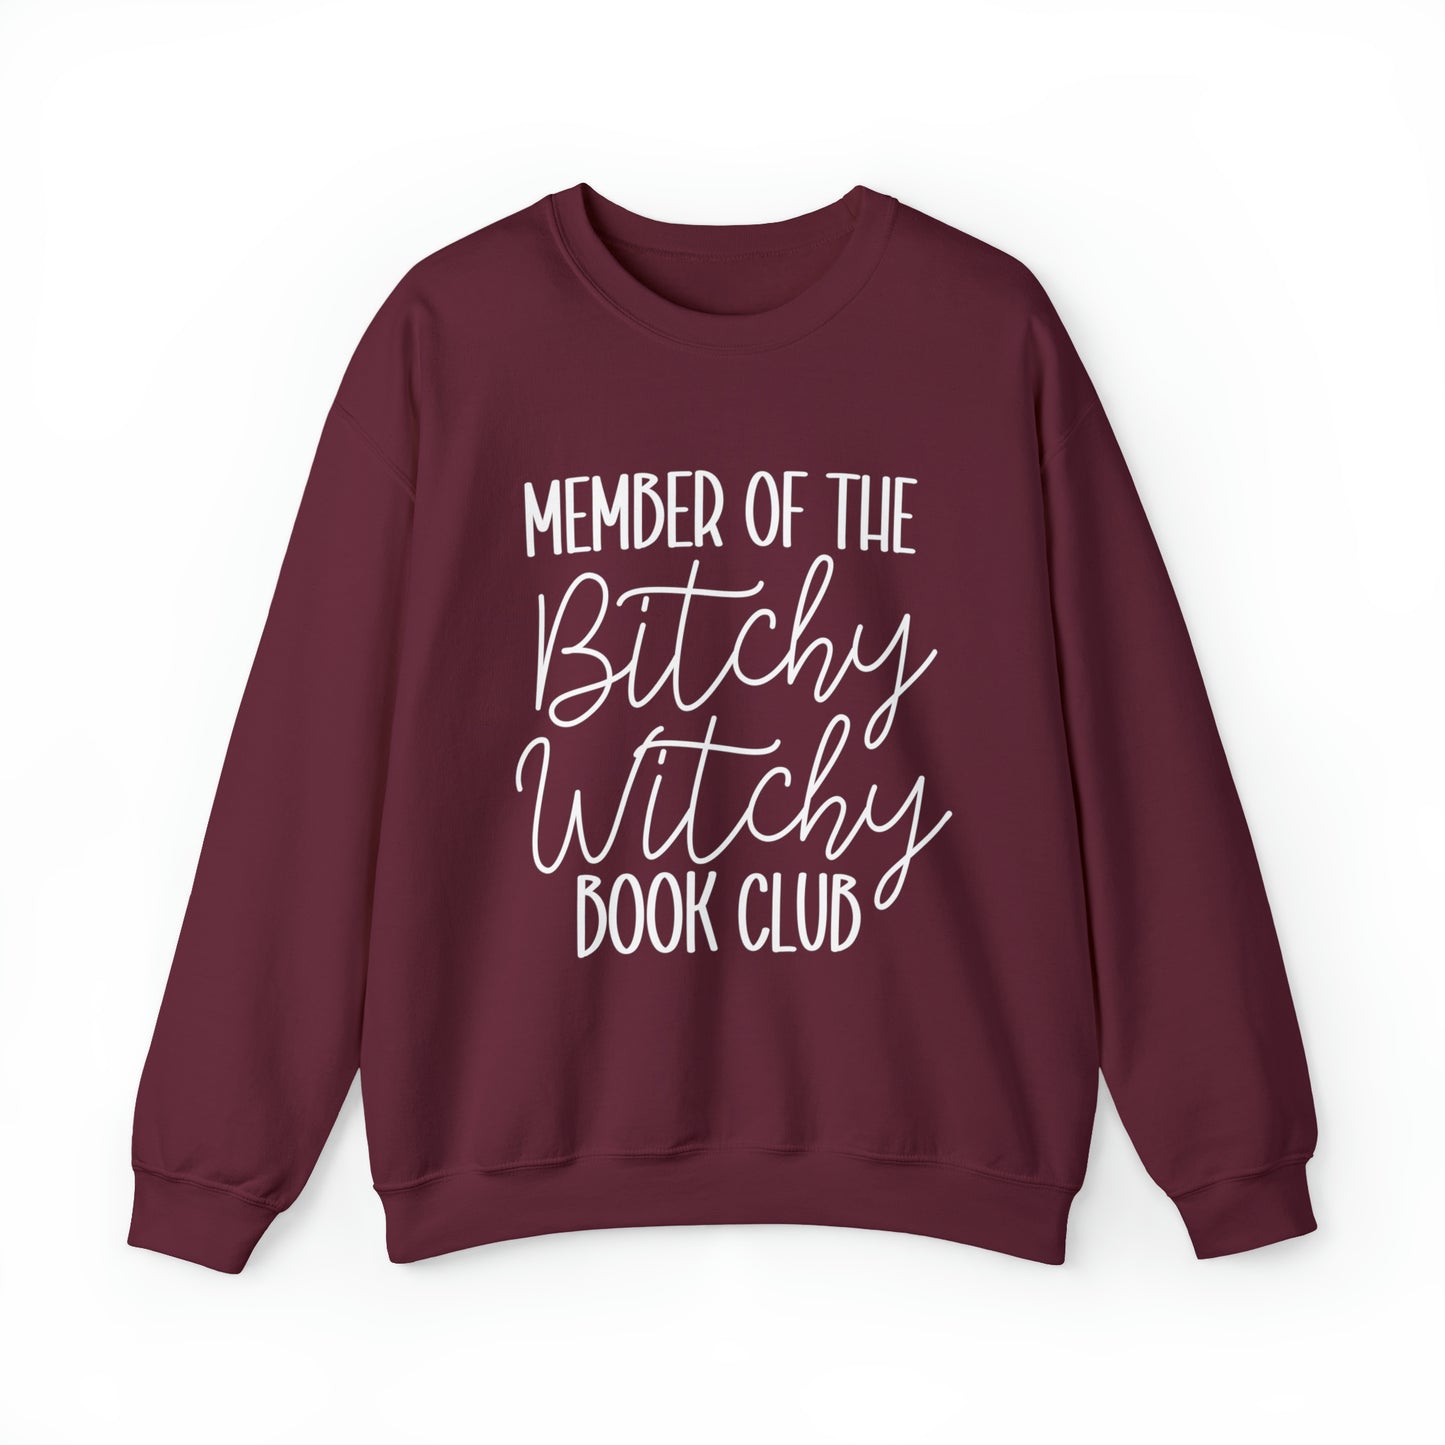 Member of the Bitchy Witchy Book Club Crewneck Sweatshirt